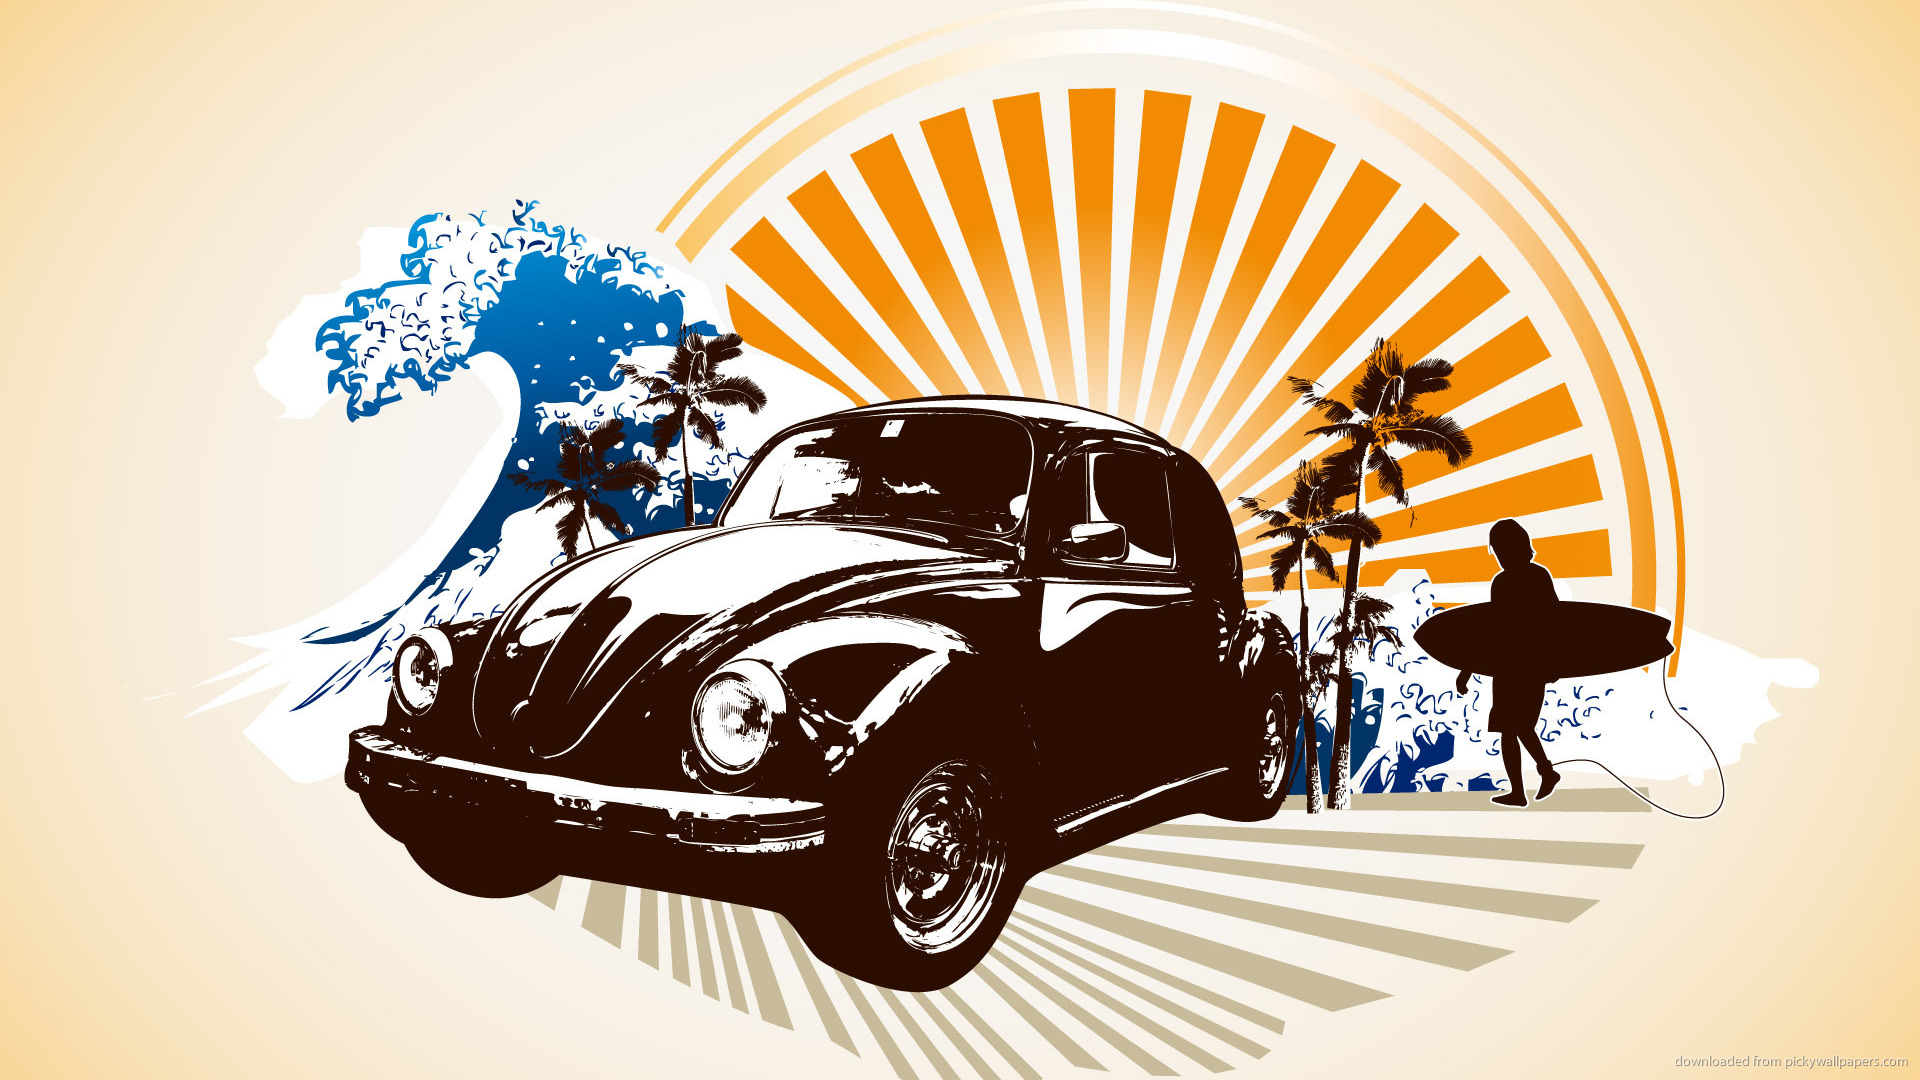 iPad Volkswagen Beetle Surfing Art Screensaver For Kindle3 And Dx